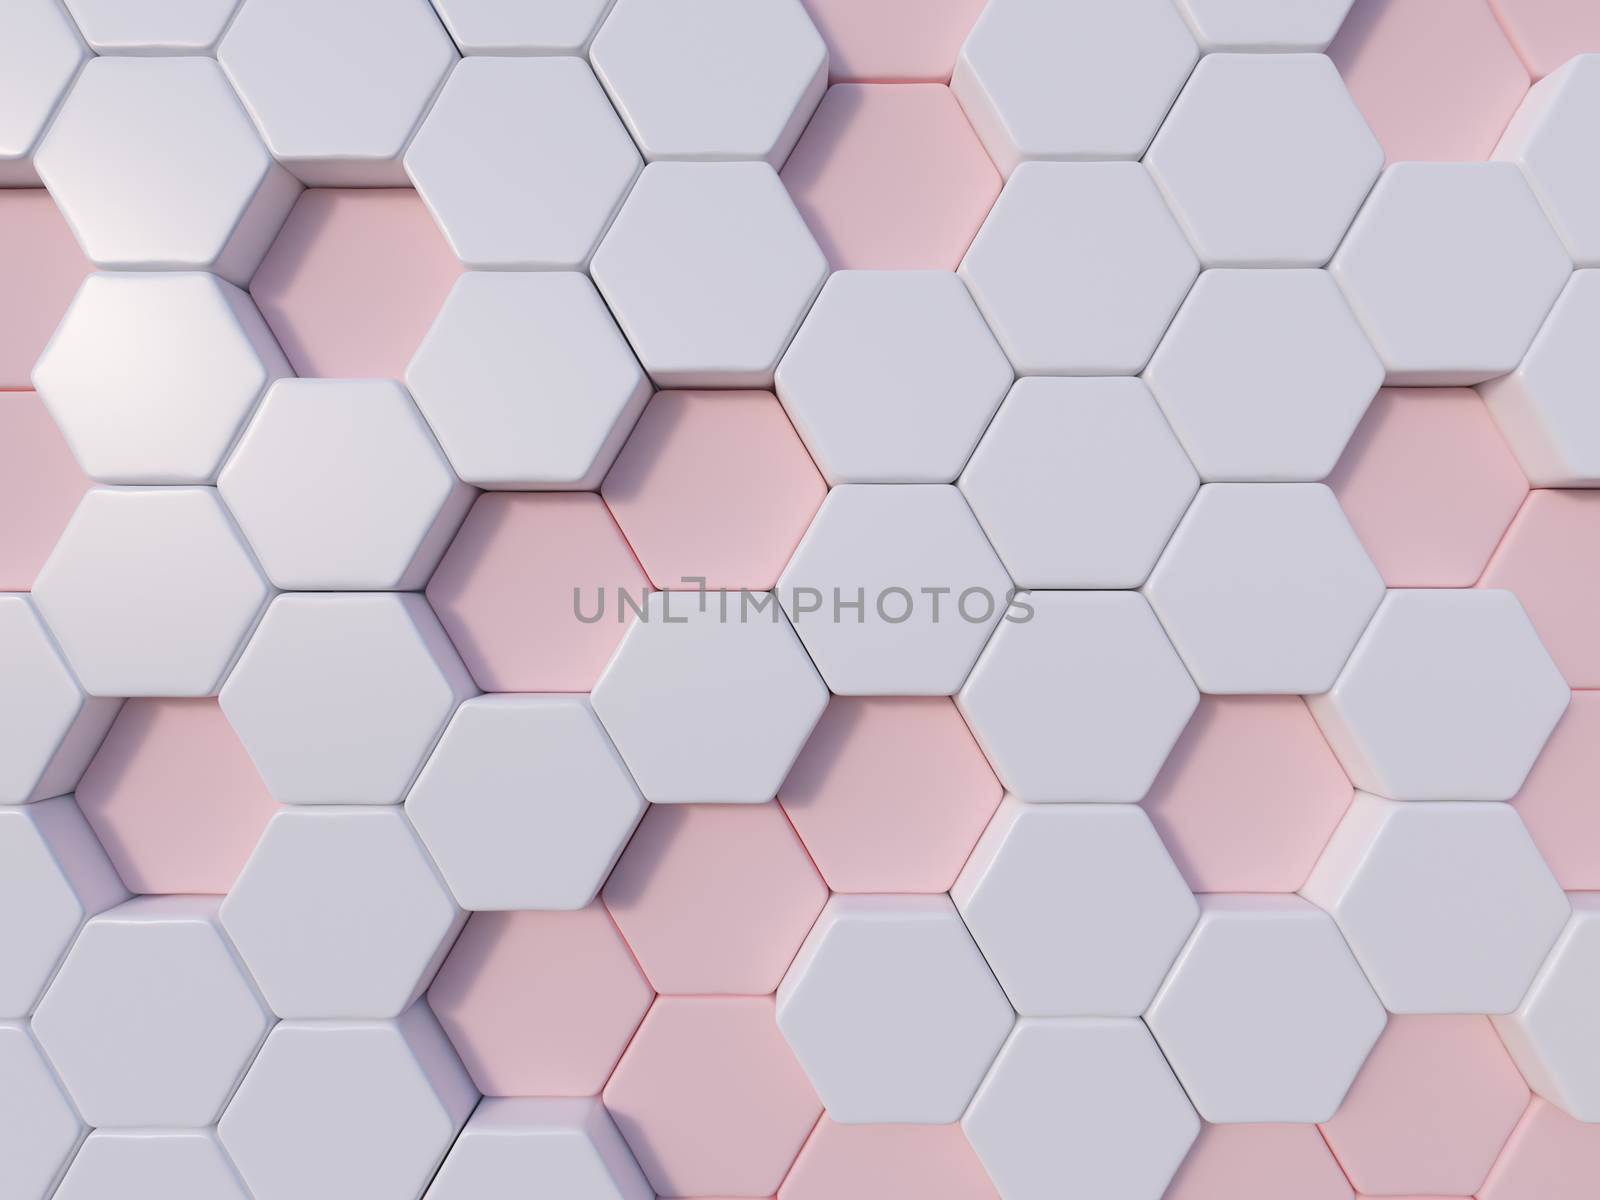 Rose Quartz  abstract 3d hexagon background bee hive